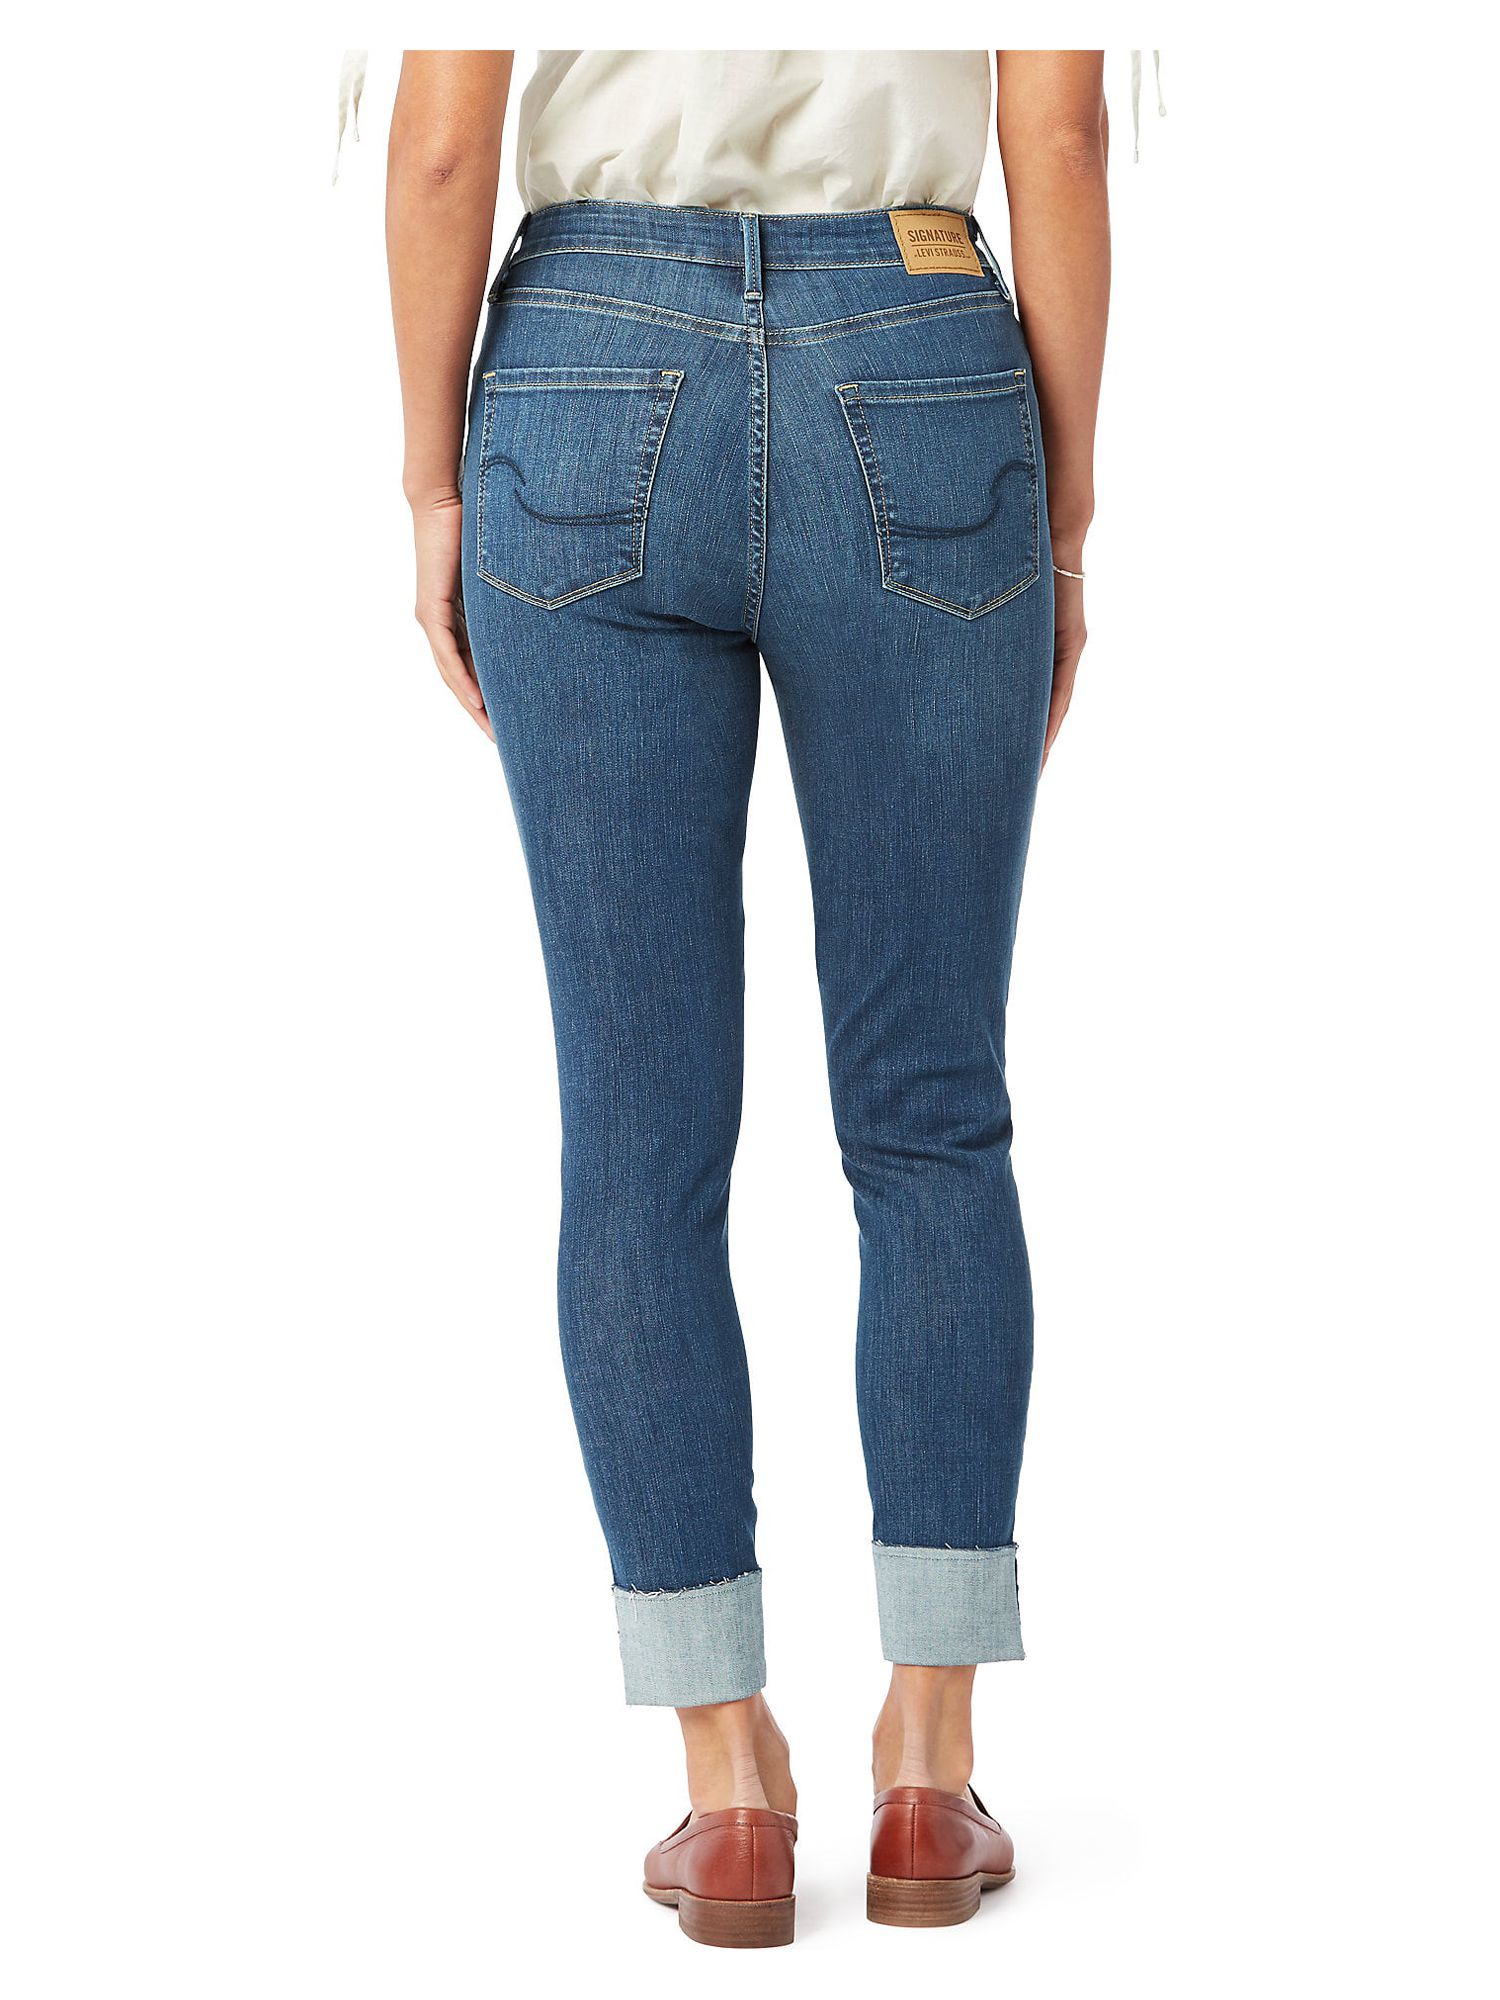 Signature by Levi Strauss & Co.™ Women's Simply Stretch Shaping High Rise Ankle Skinny Jeans - image 2 of 3